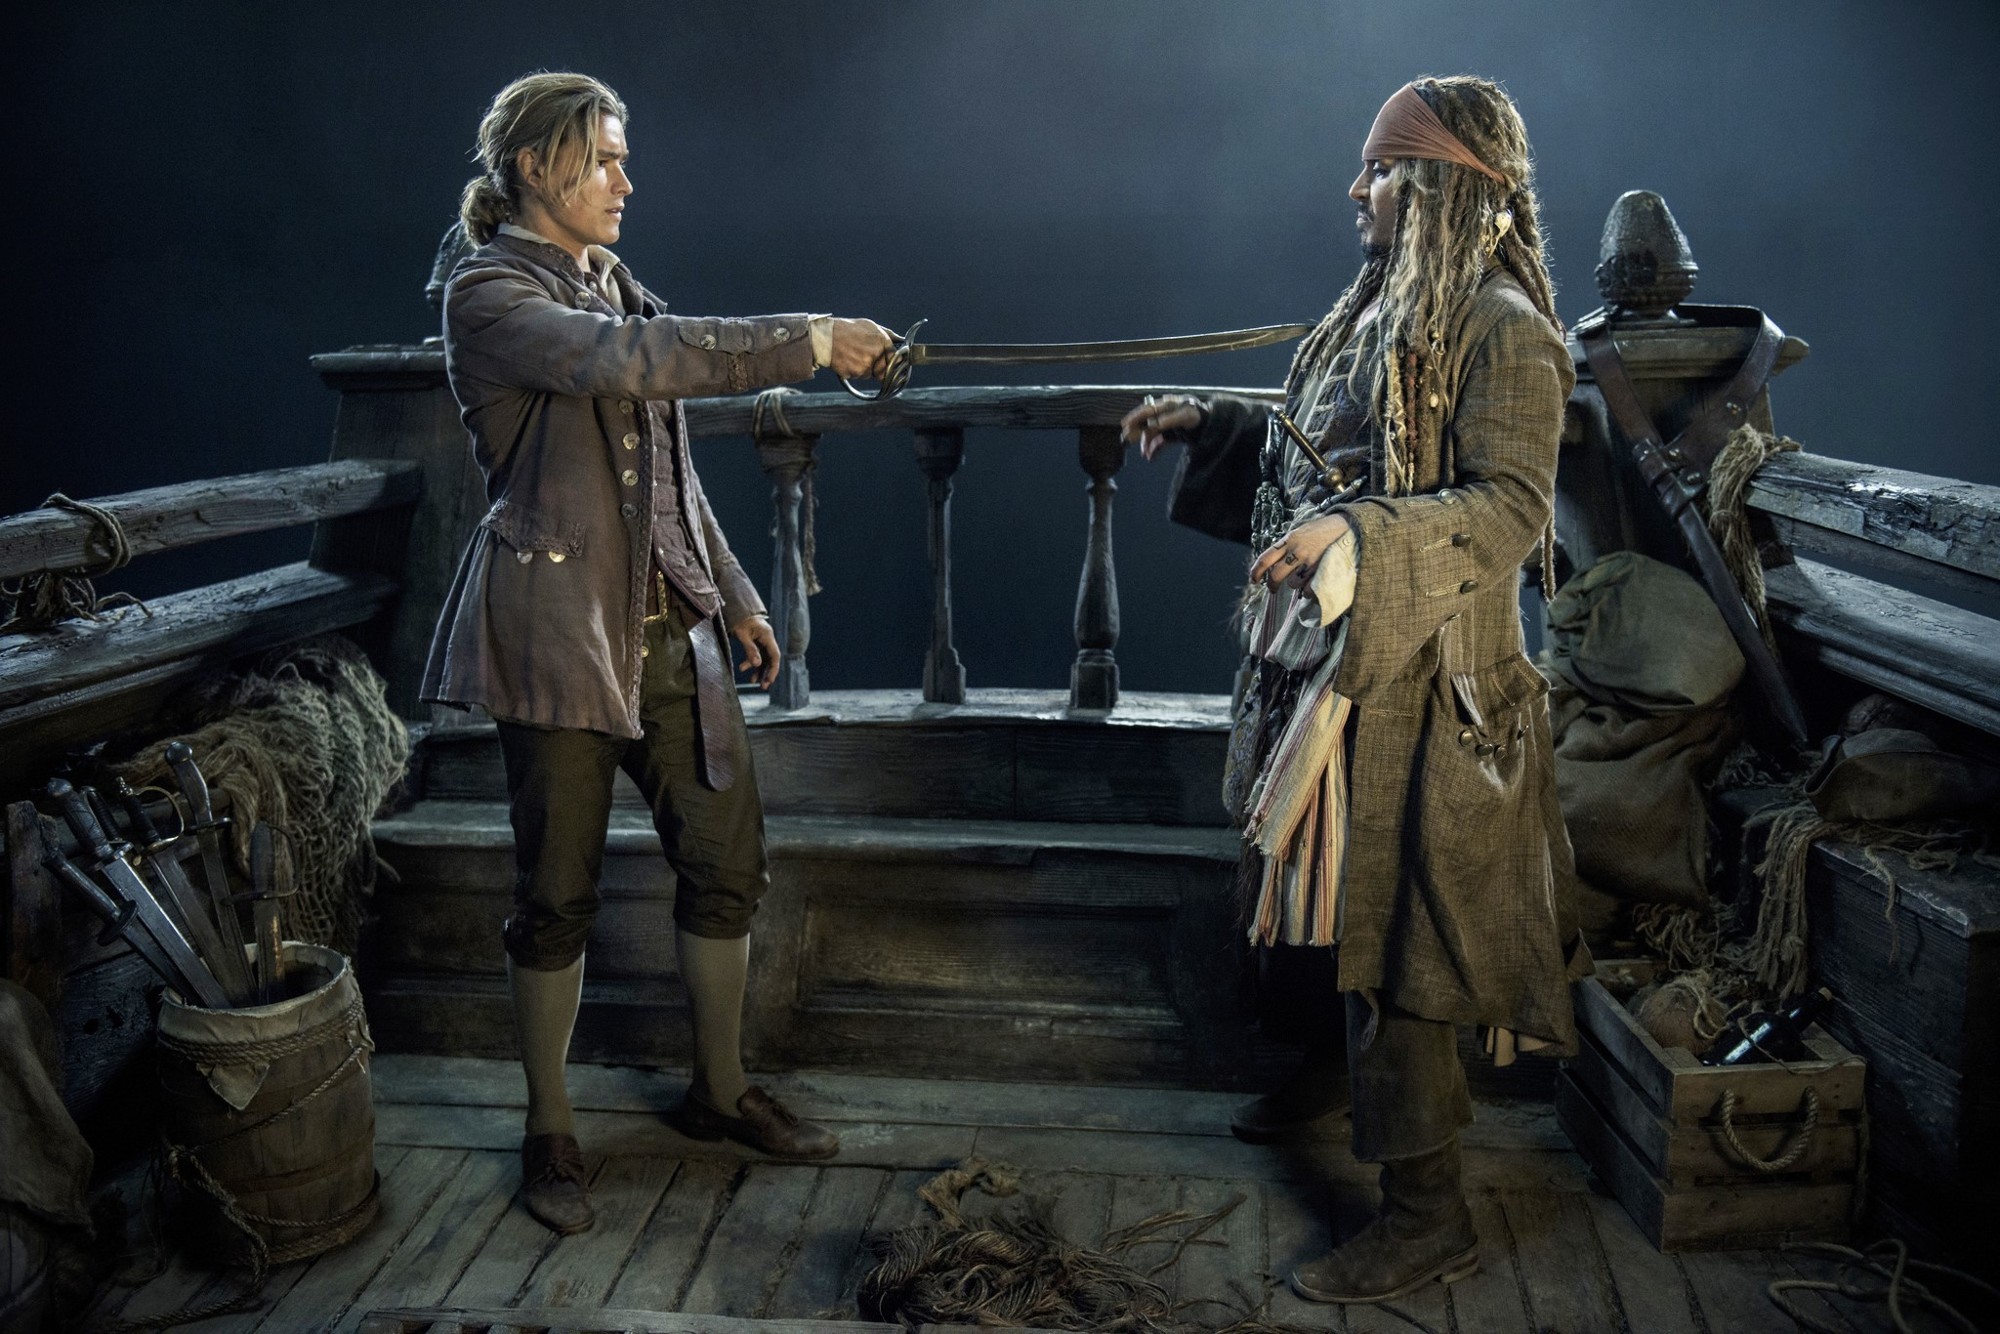 Brenton Thwaites stars as Henry Turner and Johnny Depp stars as Captain Jack Sparrow in Walt Disney Pictures' Pirates of the Caribbean: Dead Men Tell No Tales (2017)